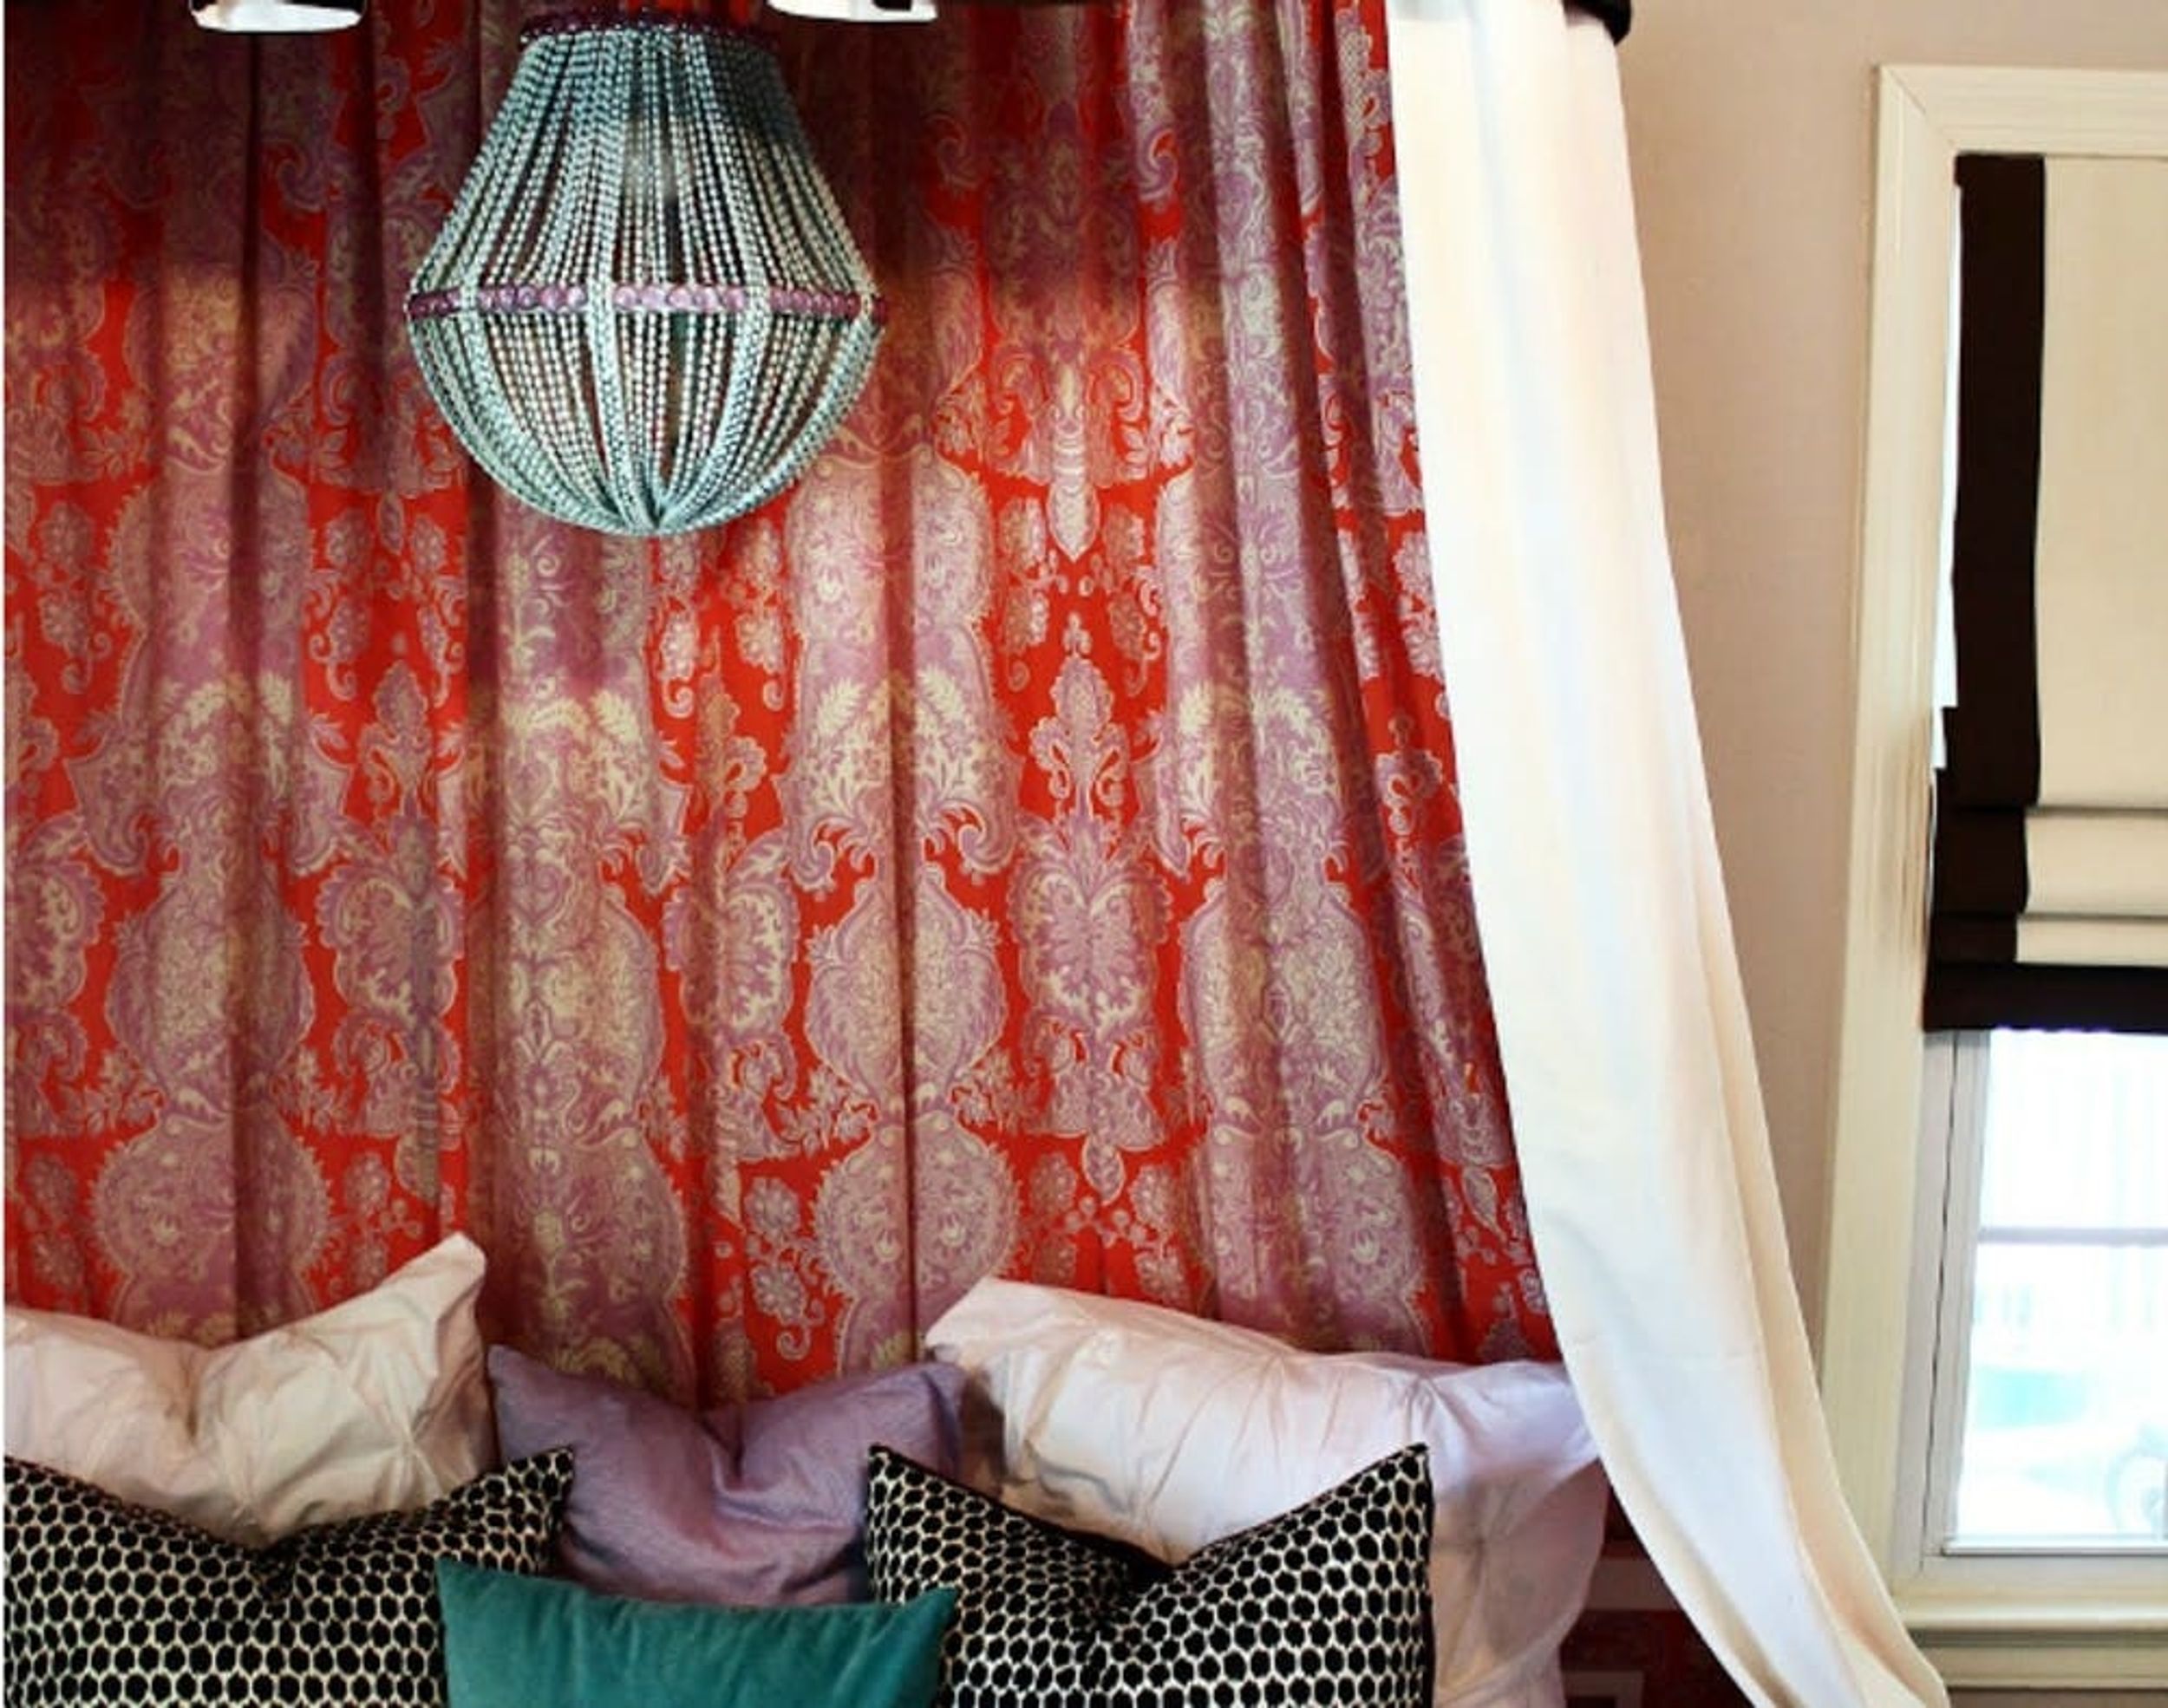 15 Covet-Worthy Canopy Beds